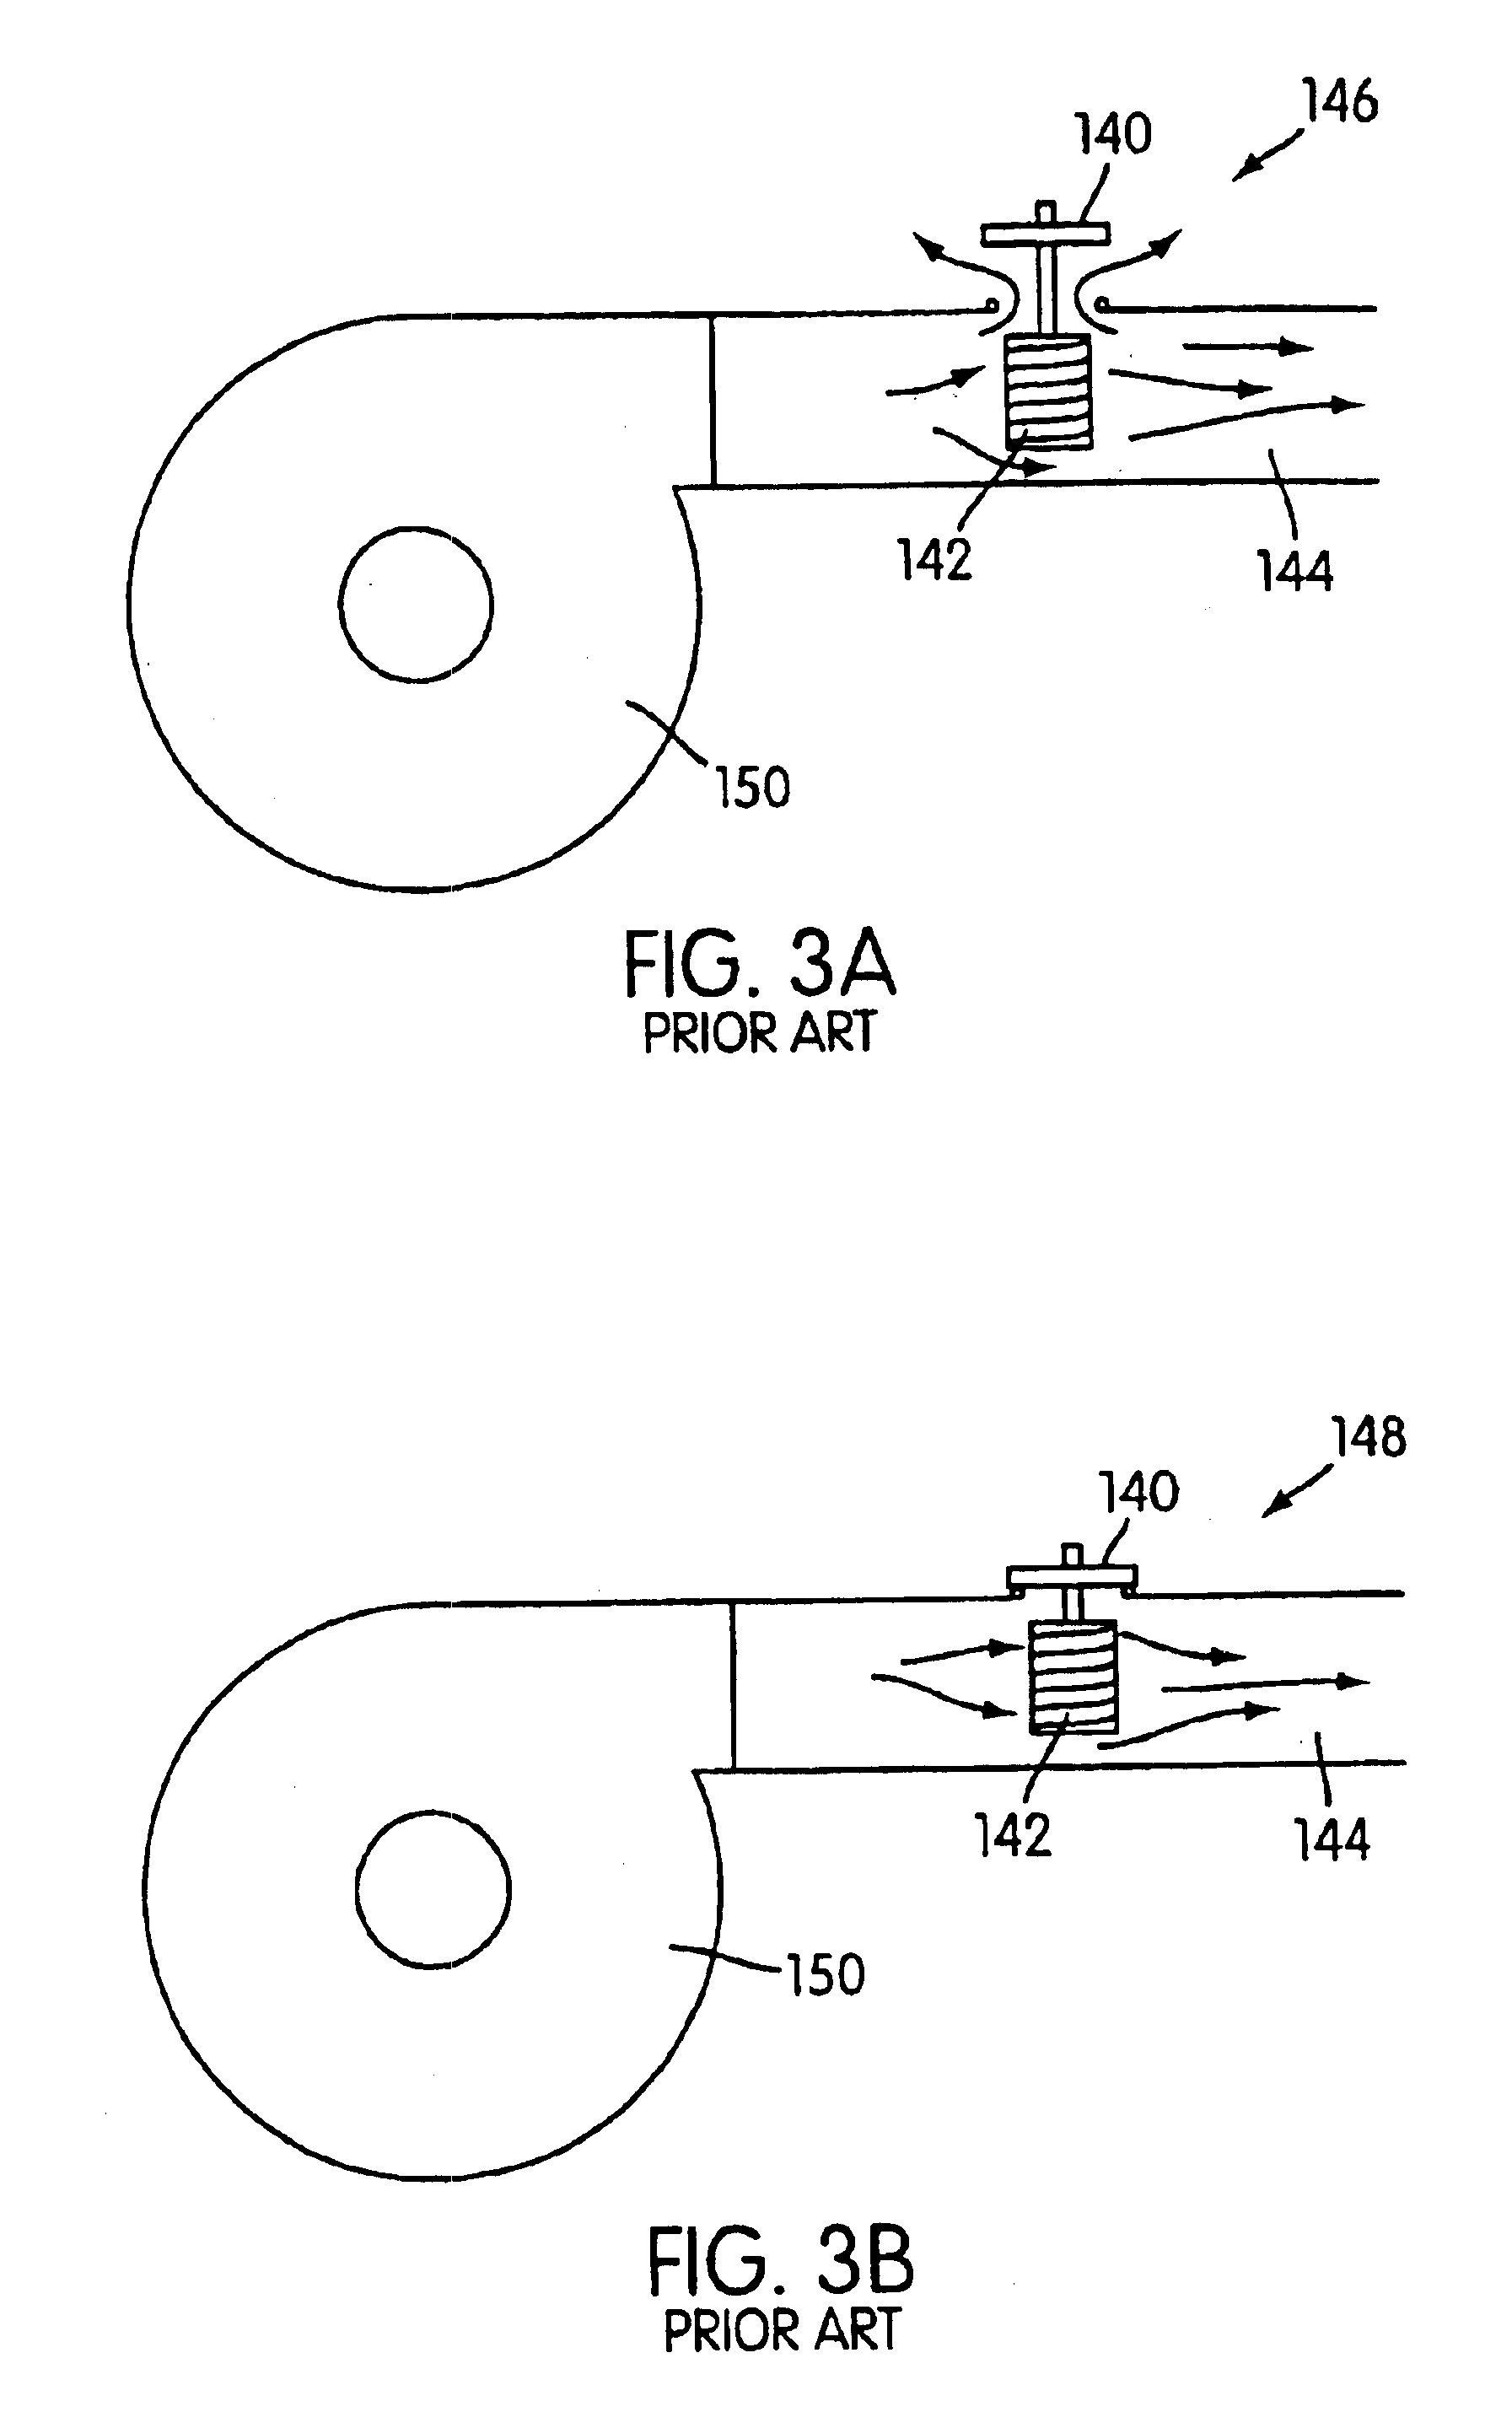 Flow diverter for controlling the pressure and flow rate in a CPAP device